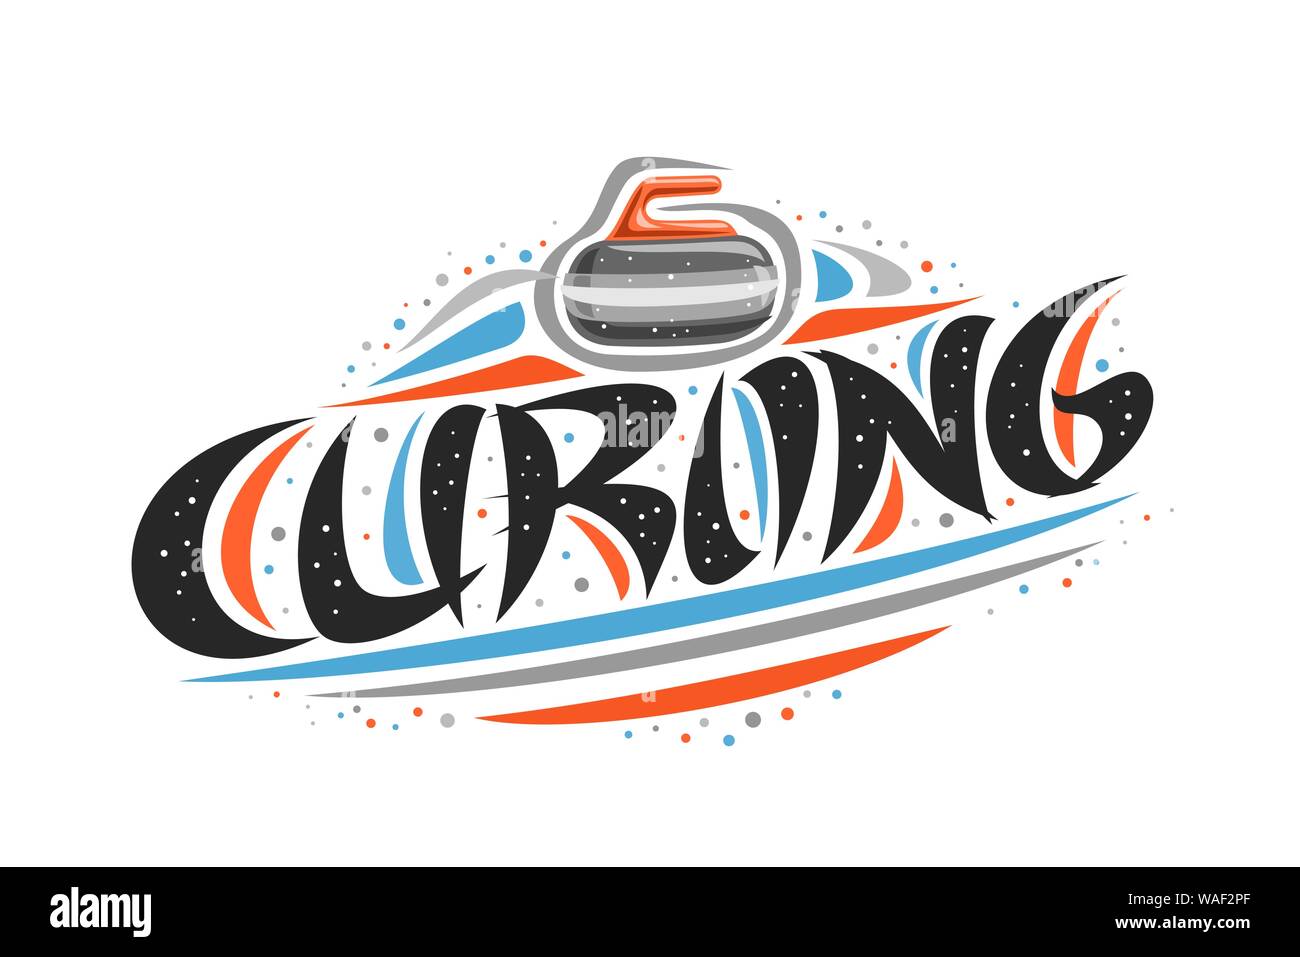 Vector logo for Curling, outline creative illustration of throwing rock in goal, original decorative brush typeface for word curling, abstract simplis Stock Vector